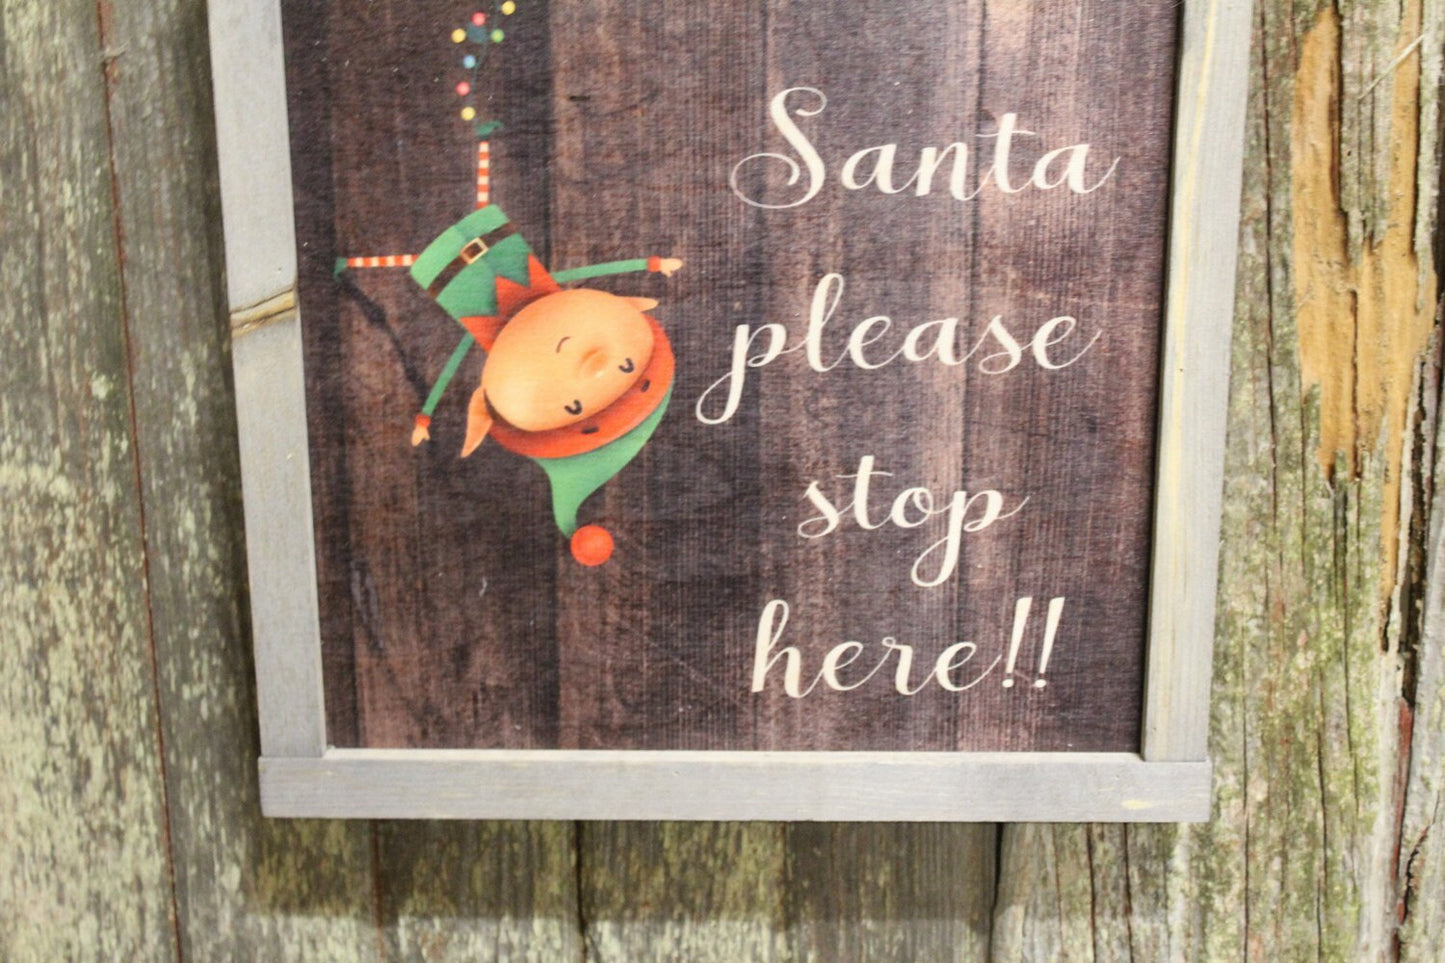 Santa Please Stop Here! Wood Sign Hanging Silly Upside Down Elf Christmas Décor Pallet Sign Framed Rustic Primitive Printed Wall Art